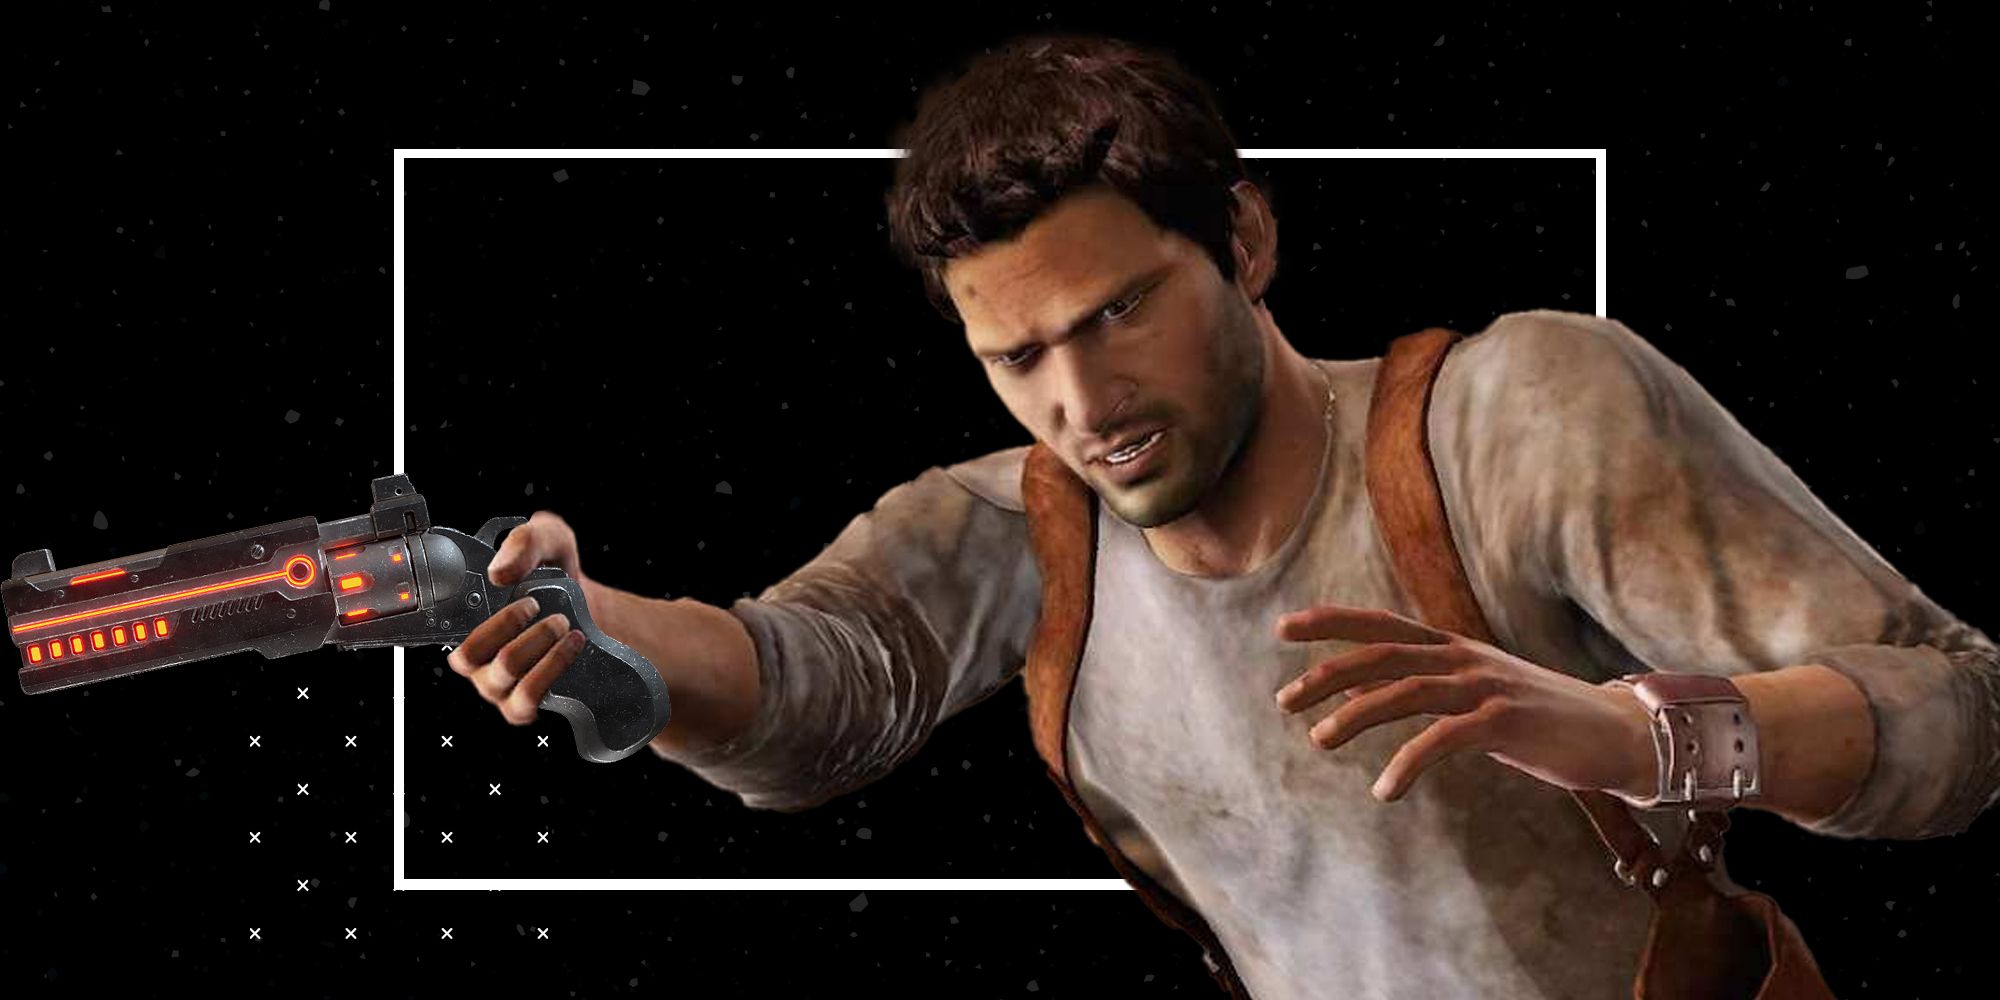 Nathan Drake holding a sci-fi blaster against a black backdrop with a white rectangle.